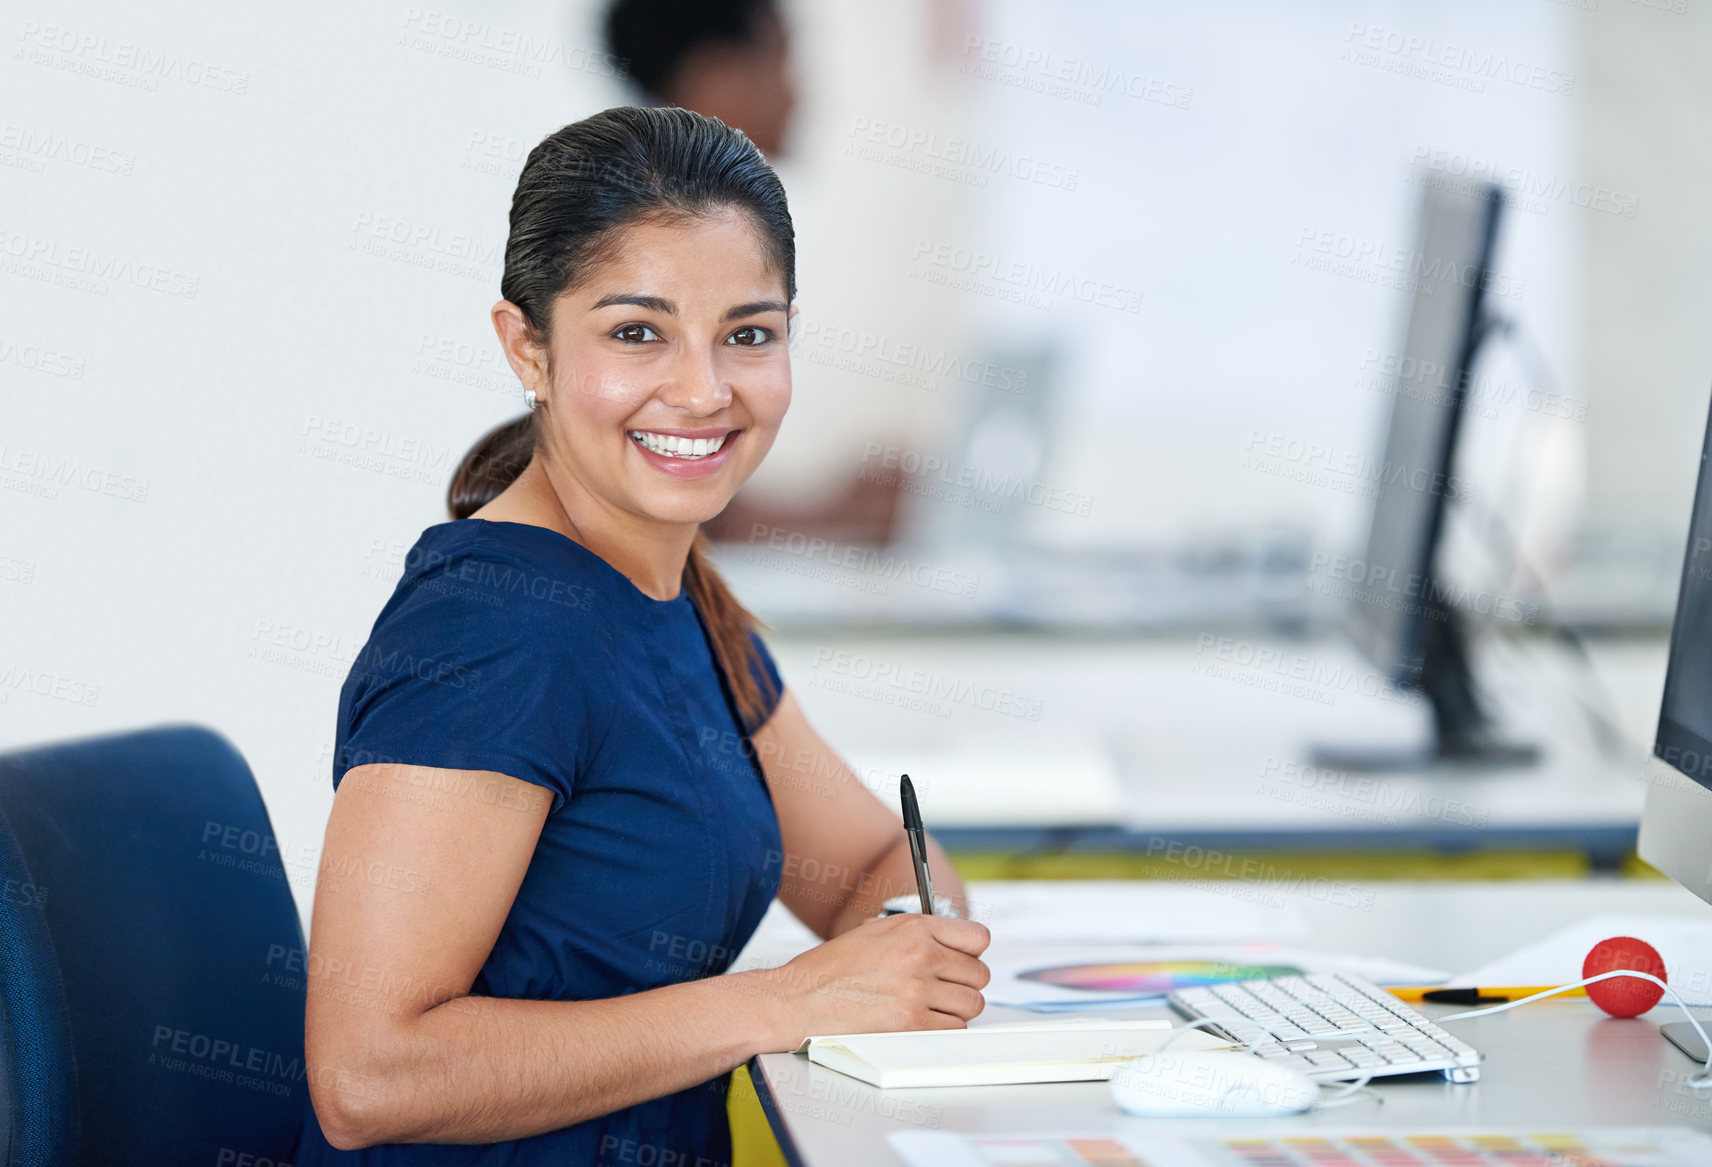 Buy stock photo Portrait of an attractive young designer sitting at her desk working on a computer